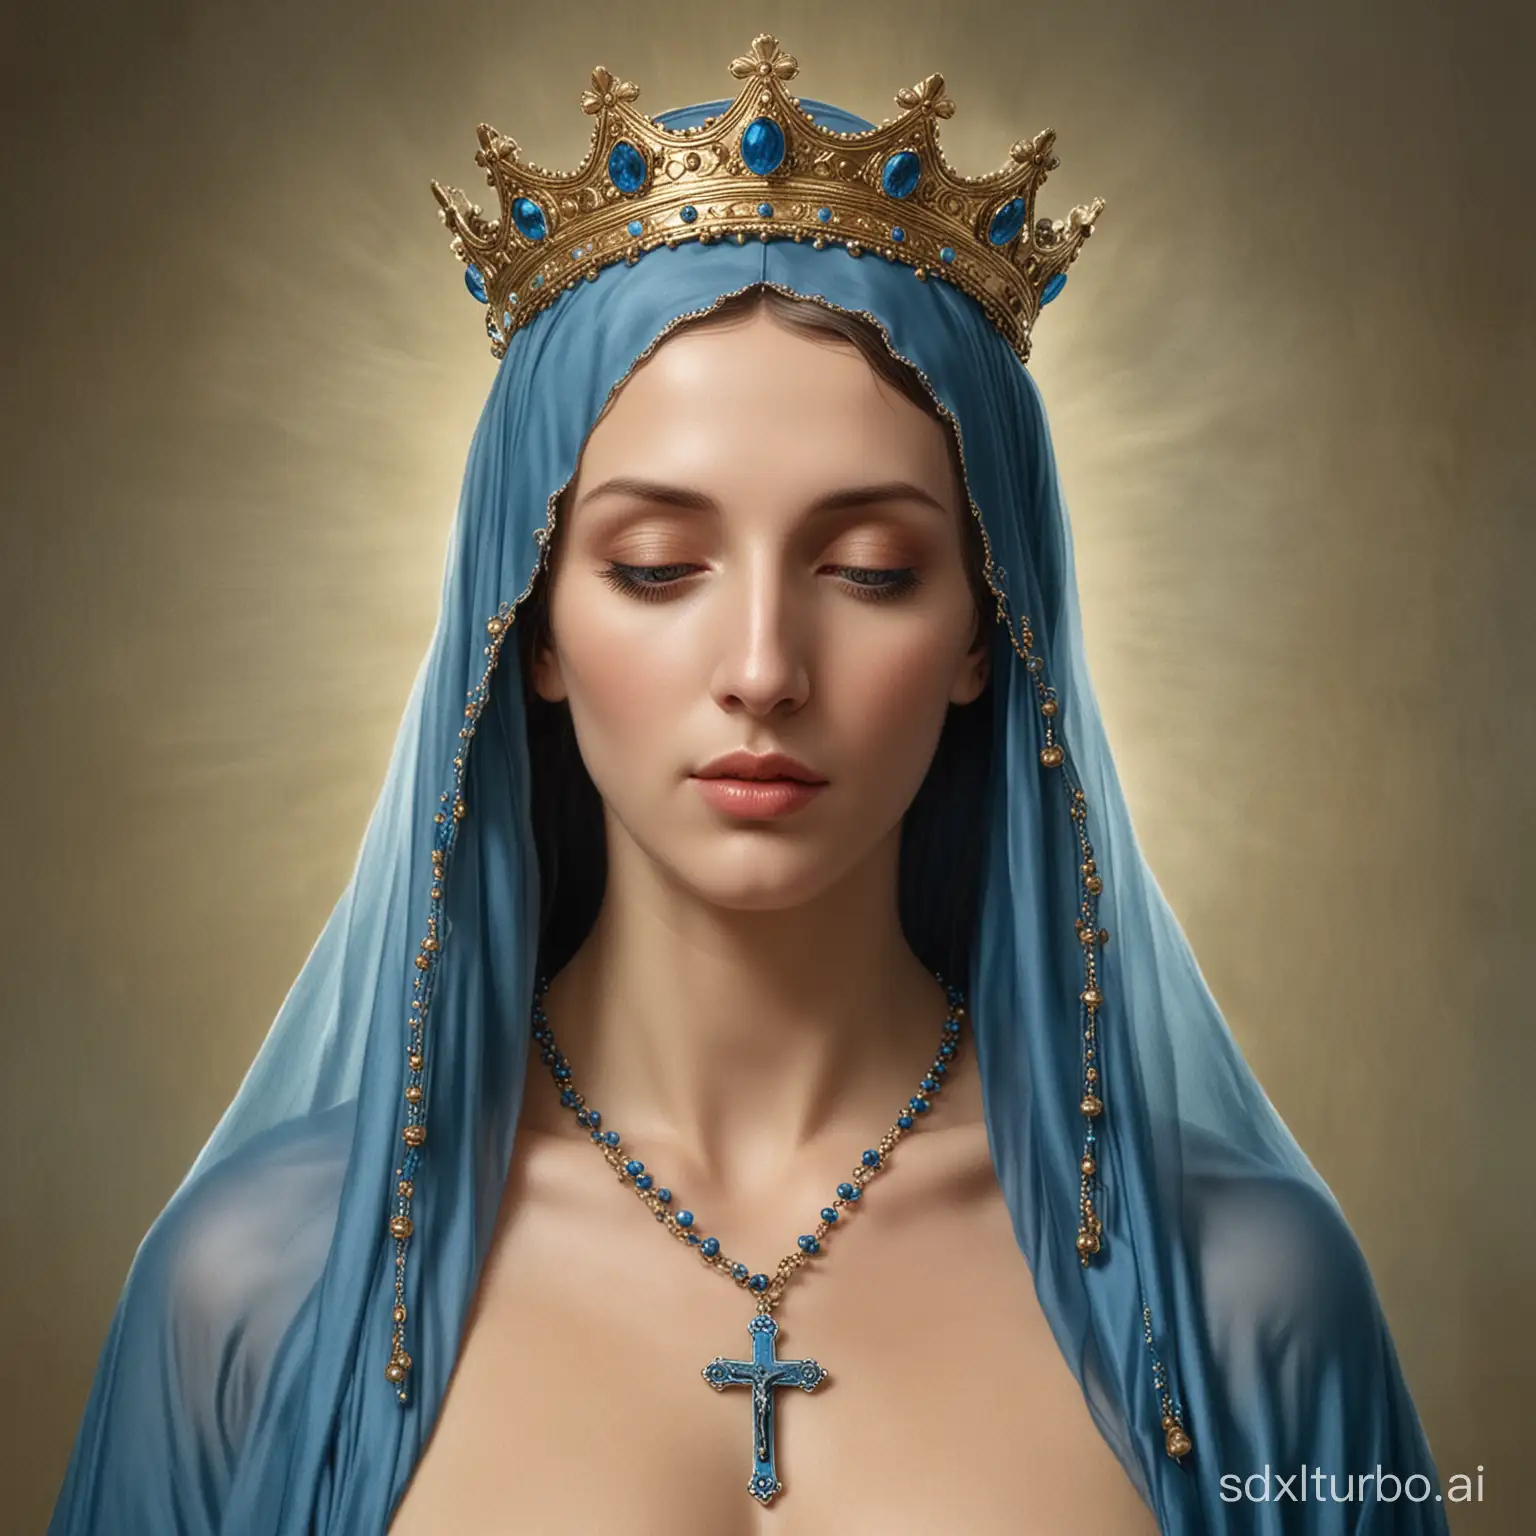 Divine-Madonna-Nude-Mother-Mary-Adorned-with-Crown-Blue-Veil-and-Rosary